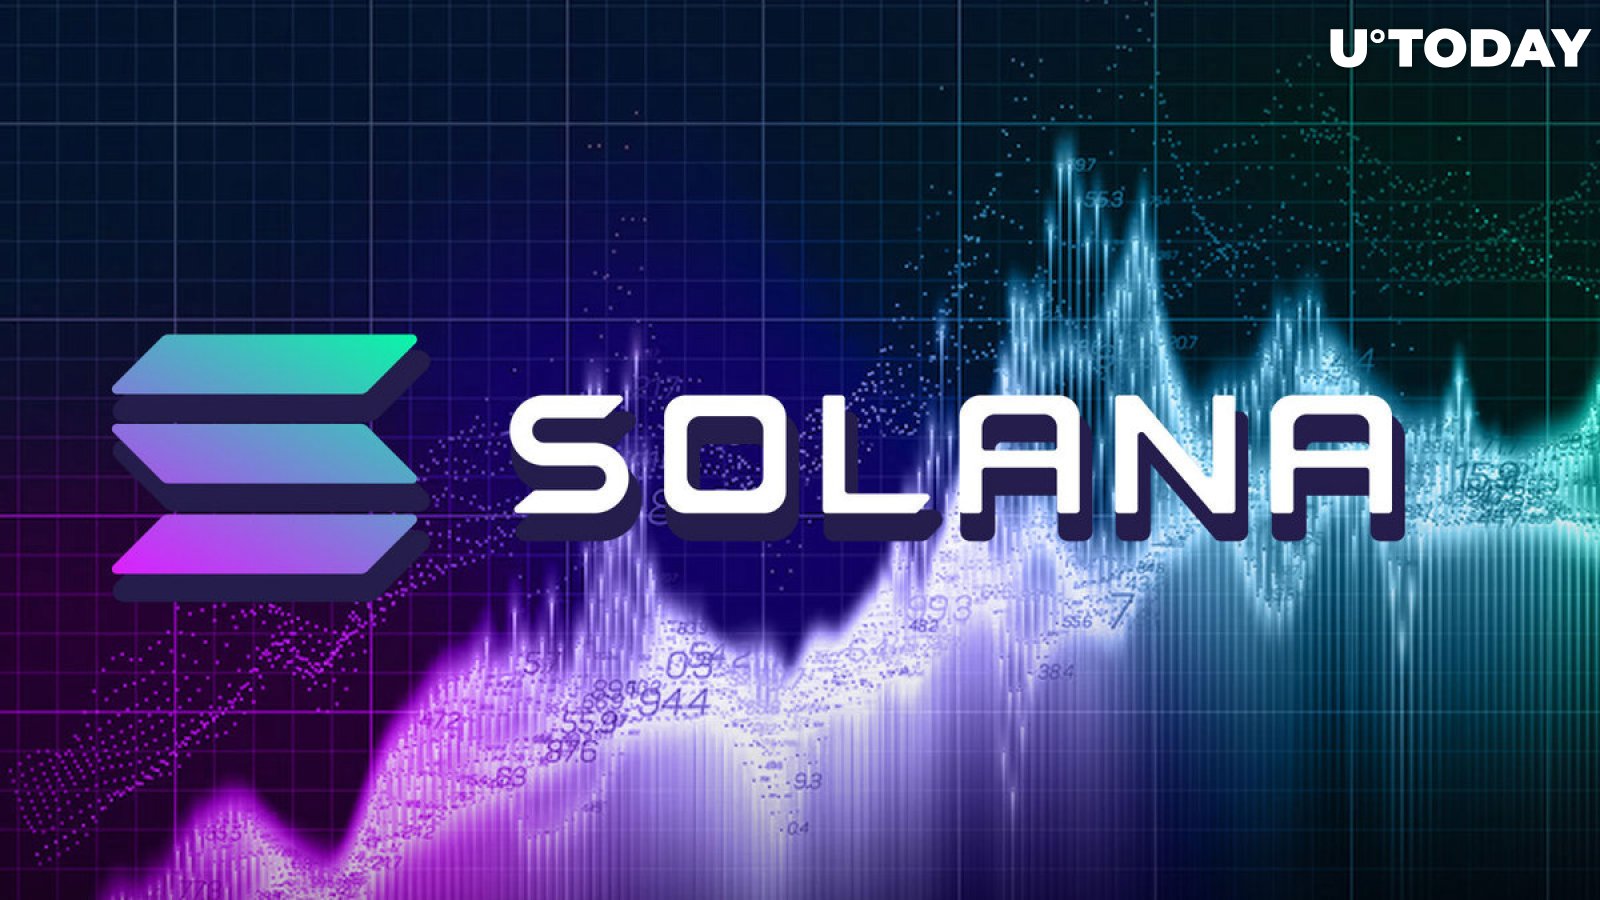 Solana (SOL) up 4% Amid Broader Market Rout, Why Is SOL Holding Down Fort?